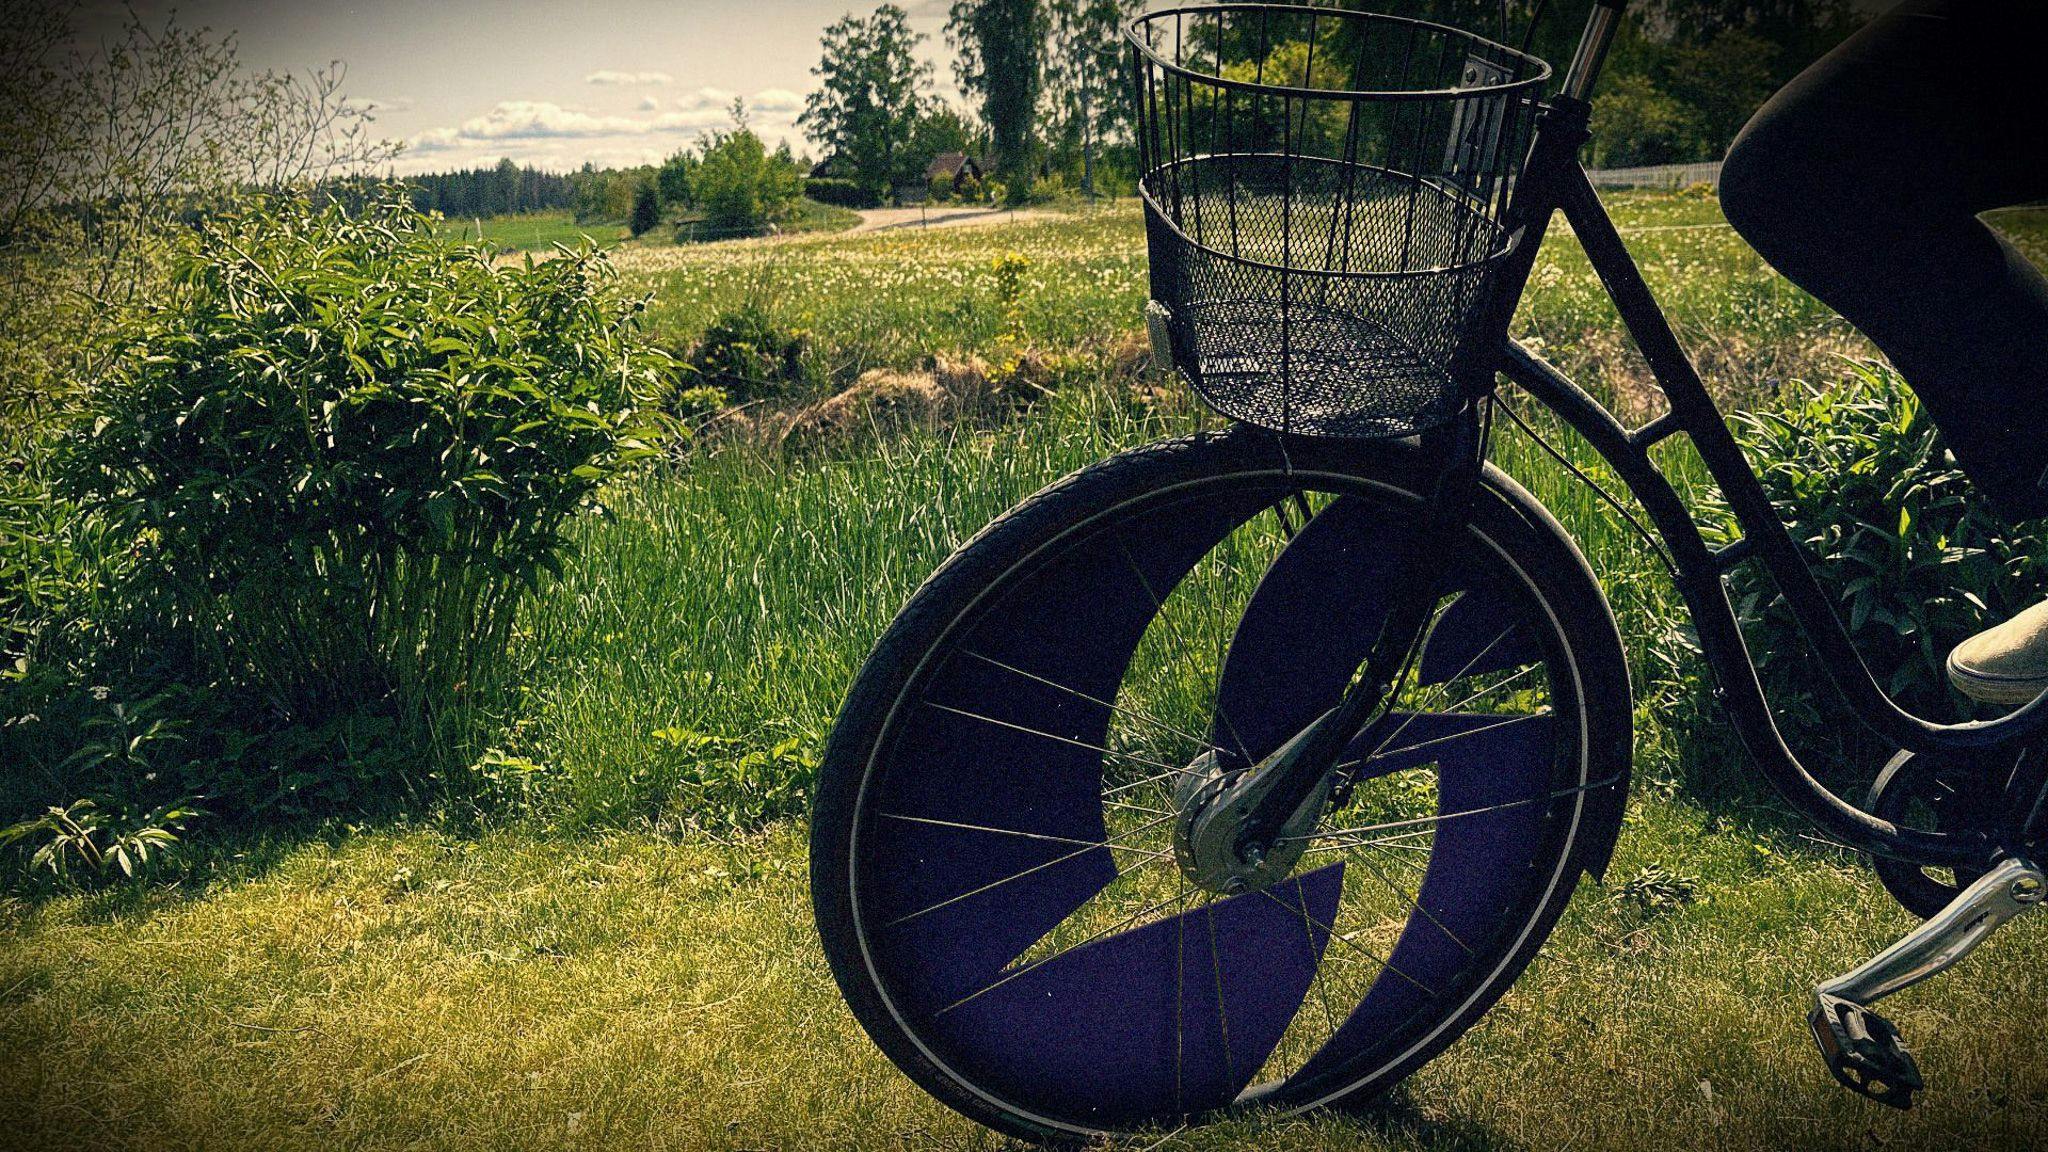 A bicycle with a wheel shaped like the Liquid Swords logo stands on a path by a field.